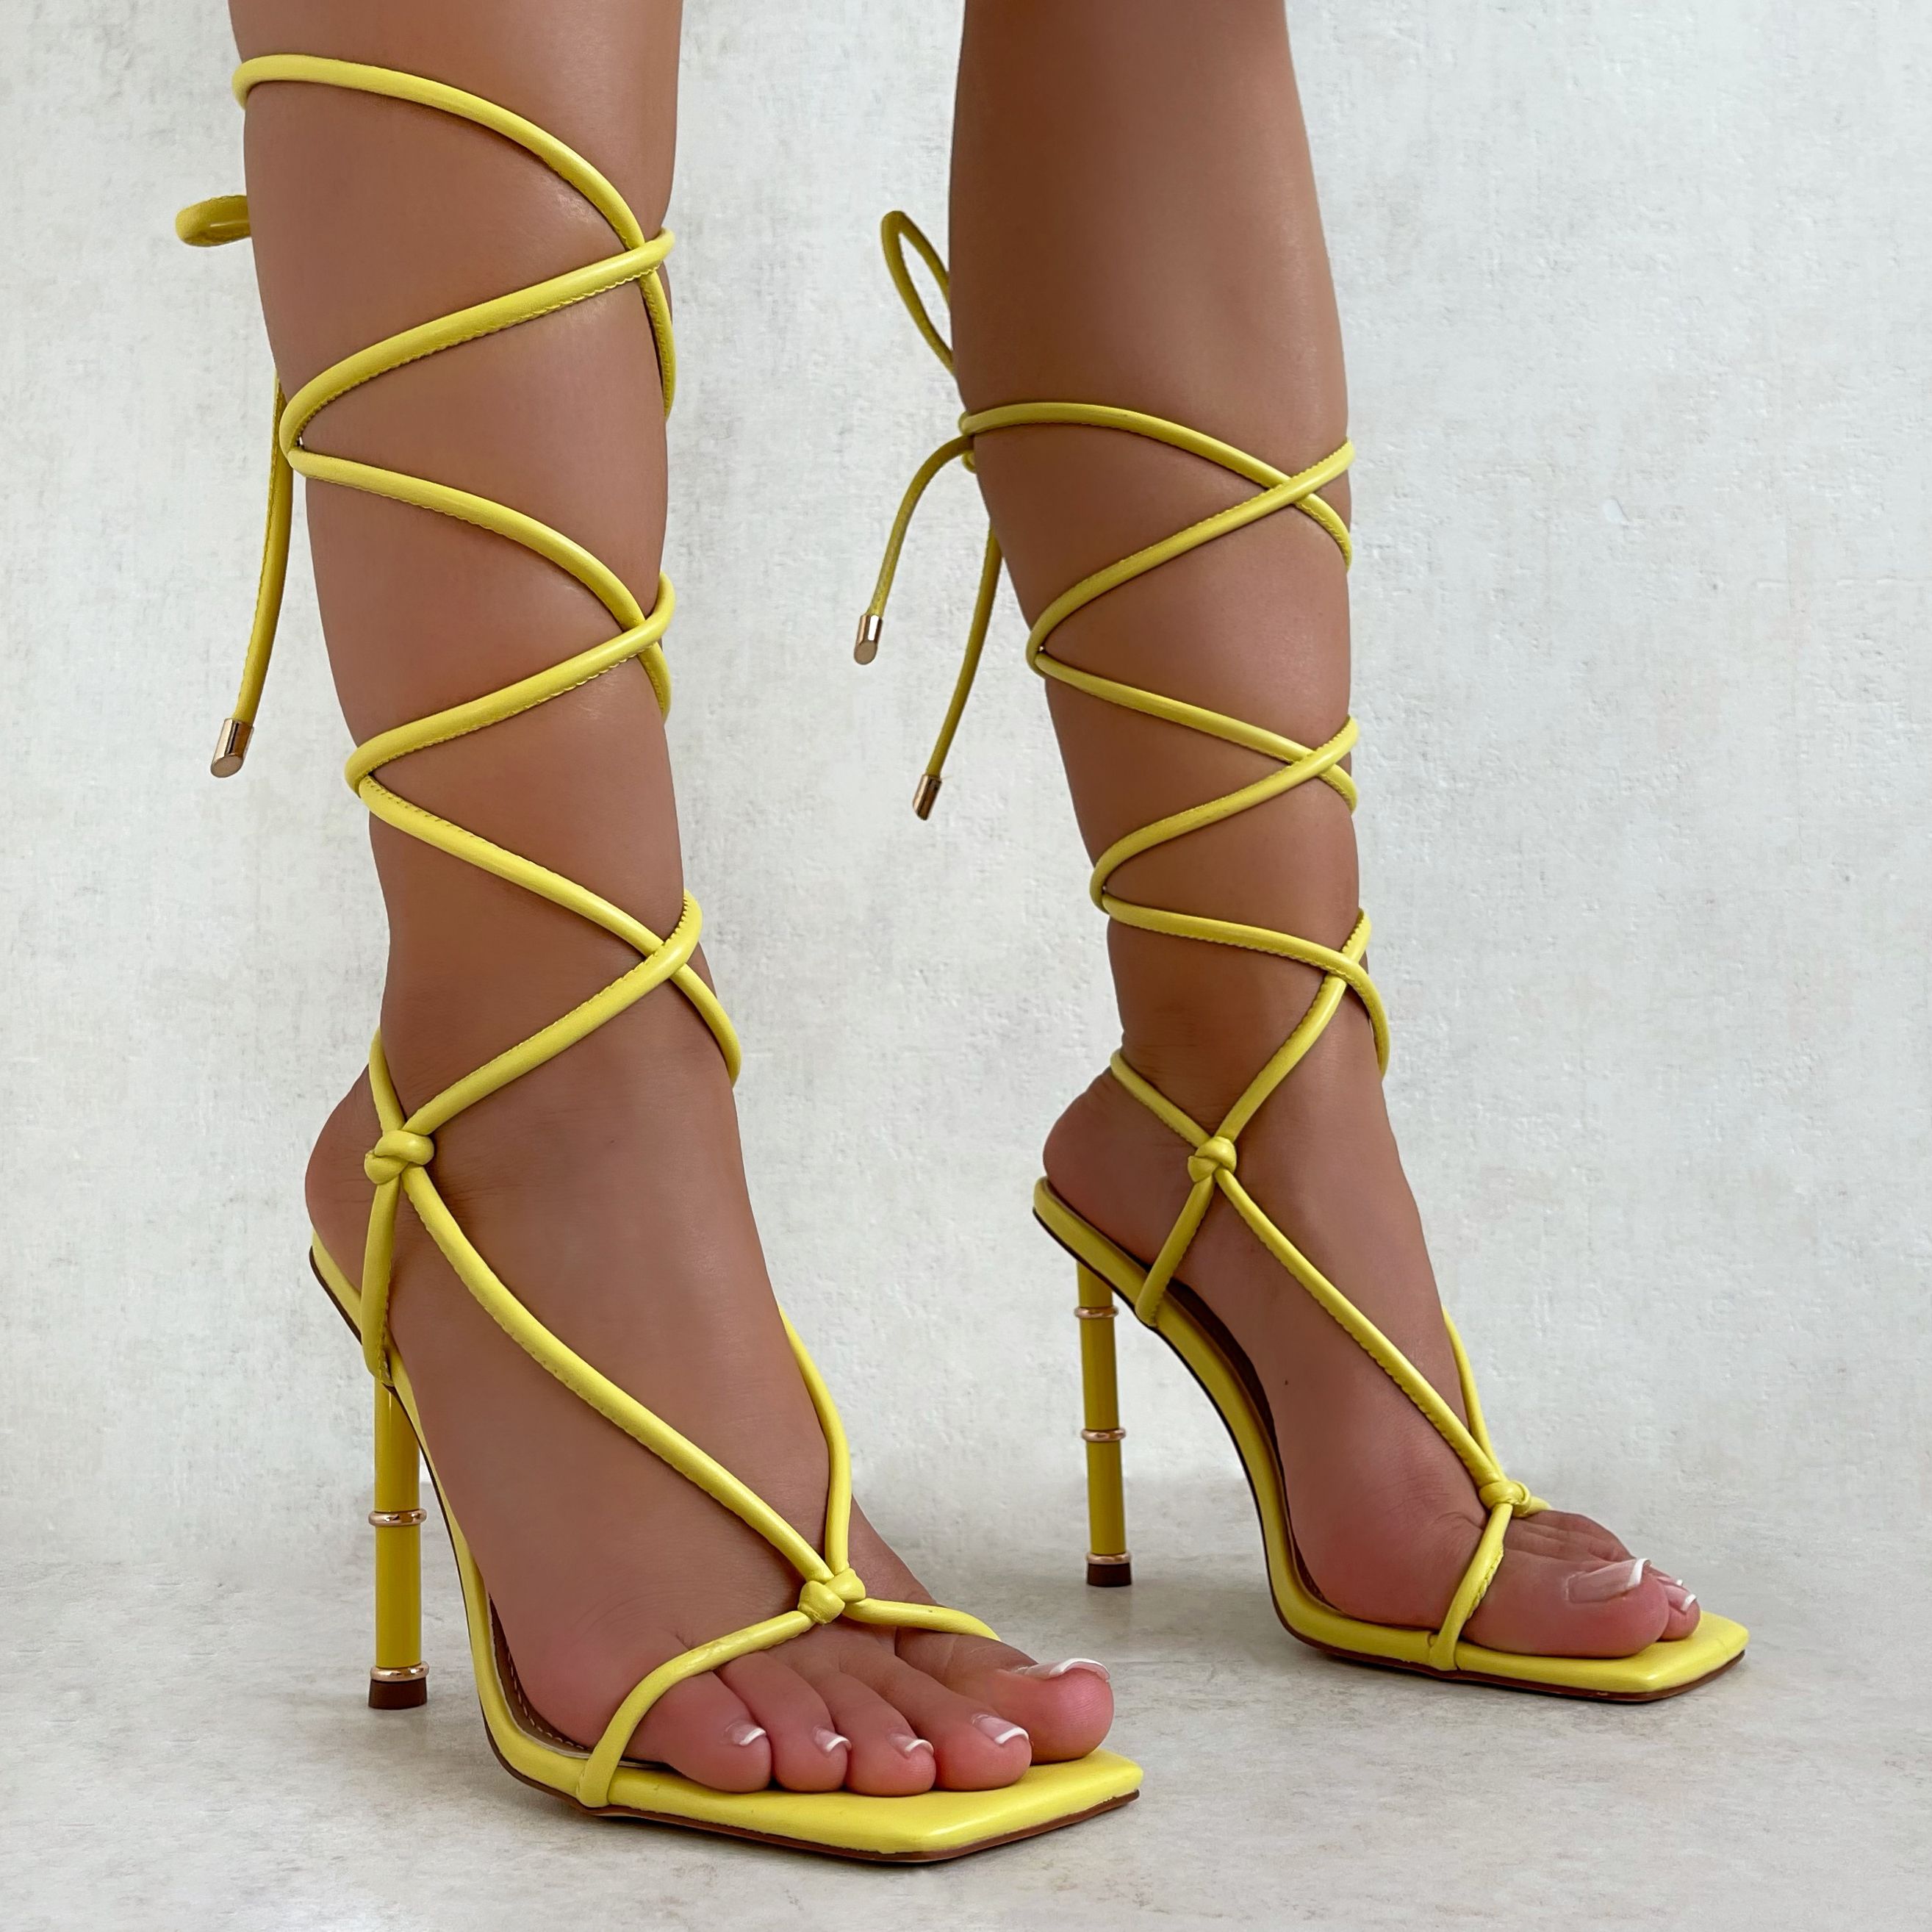 Coraline Yellow Square Toe Knot Lace Up High Heels